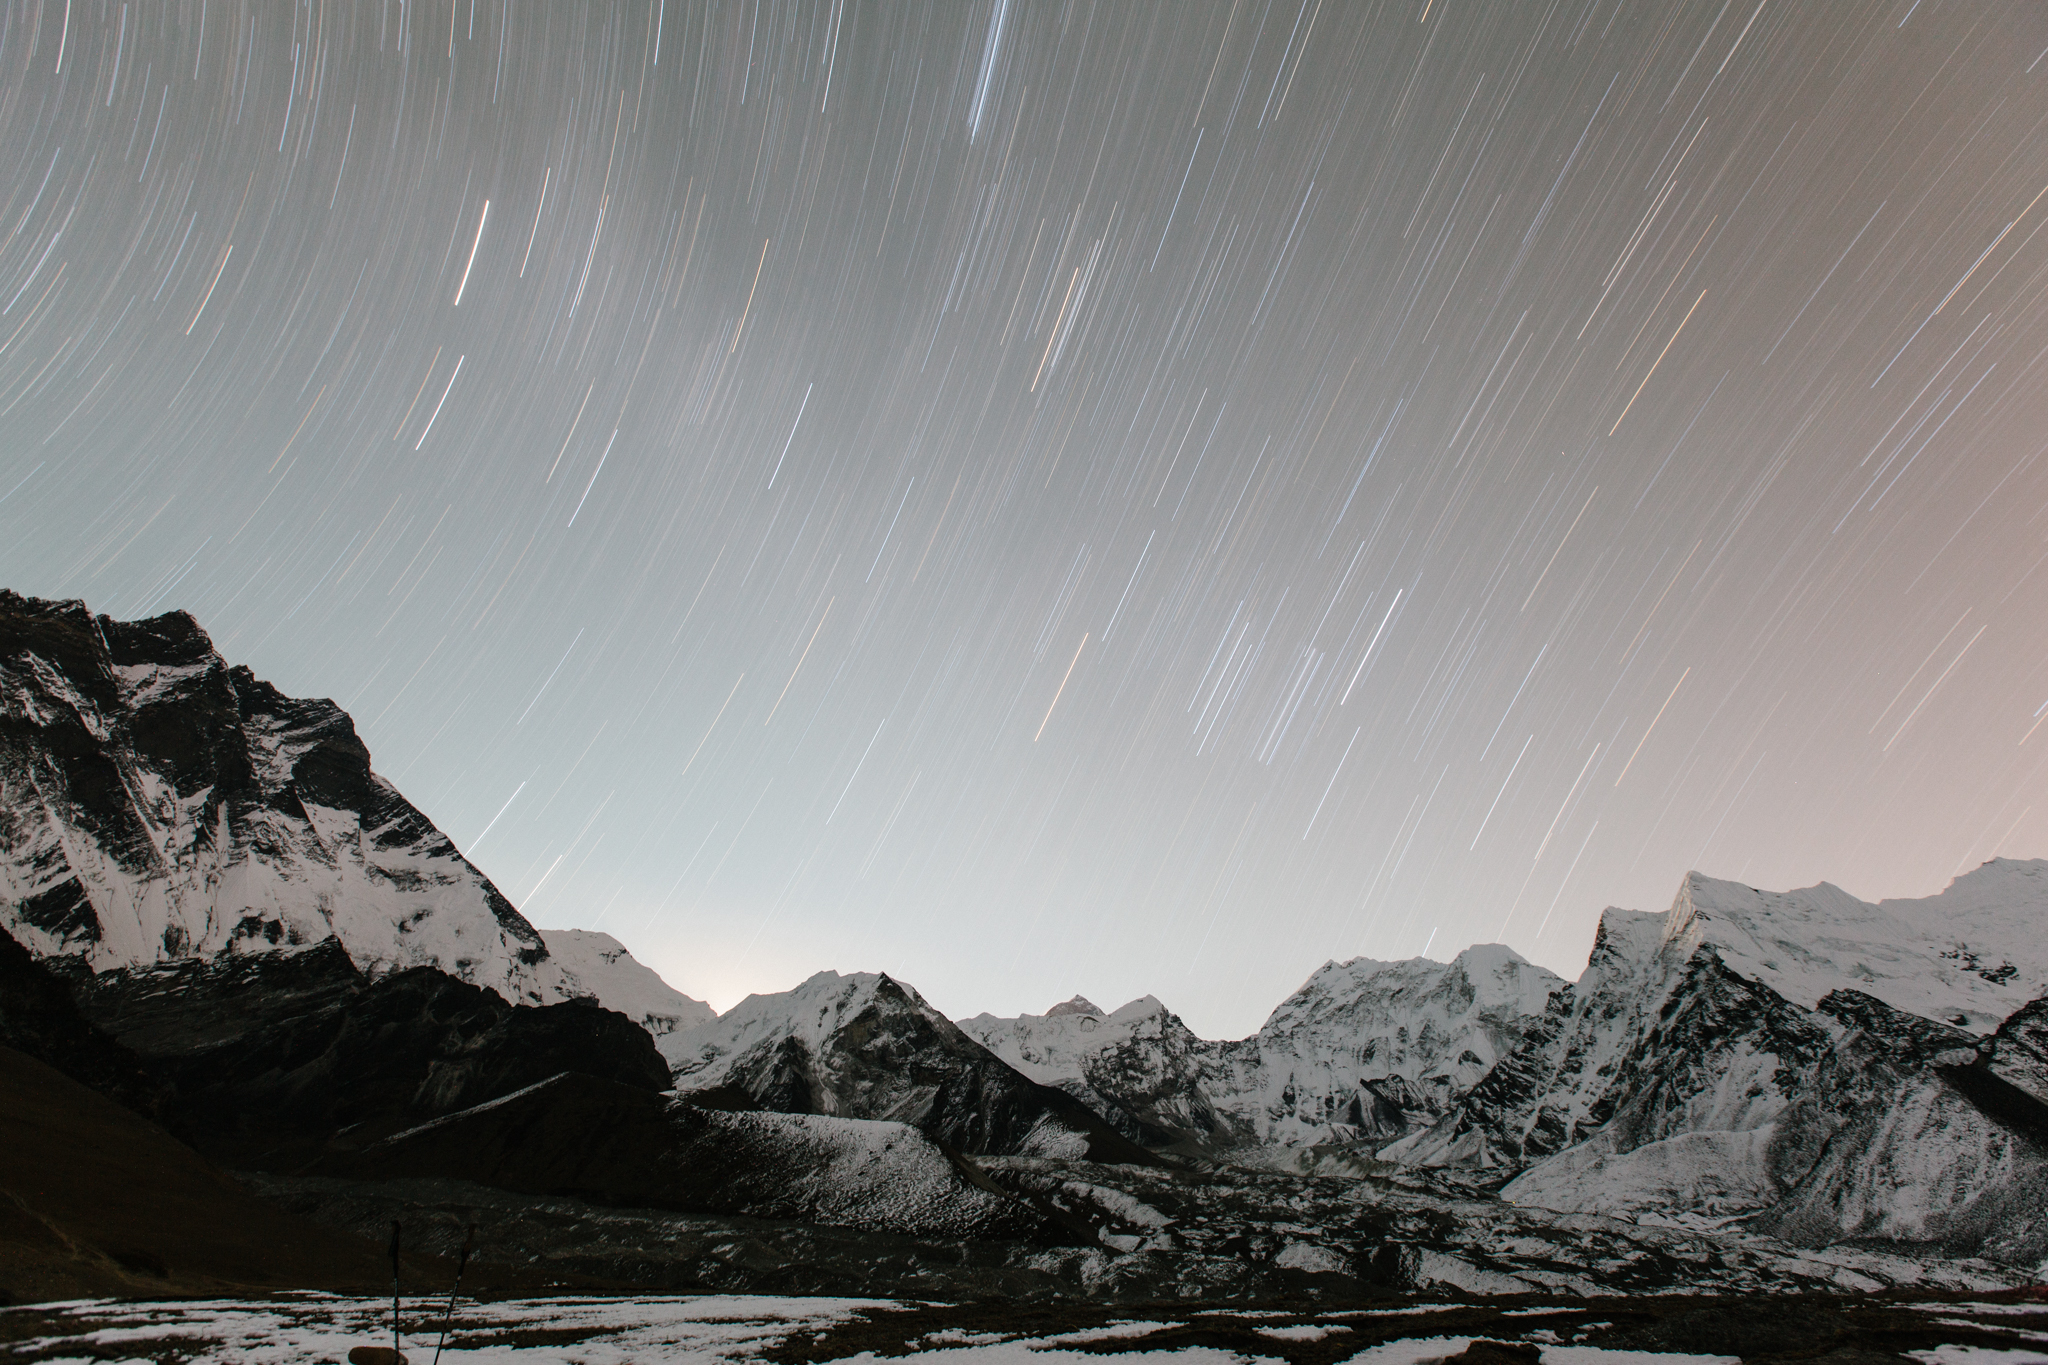 Buying These Epic Photos Will Help Nepal